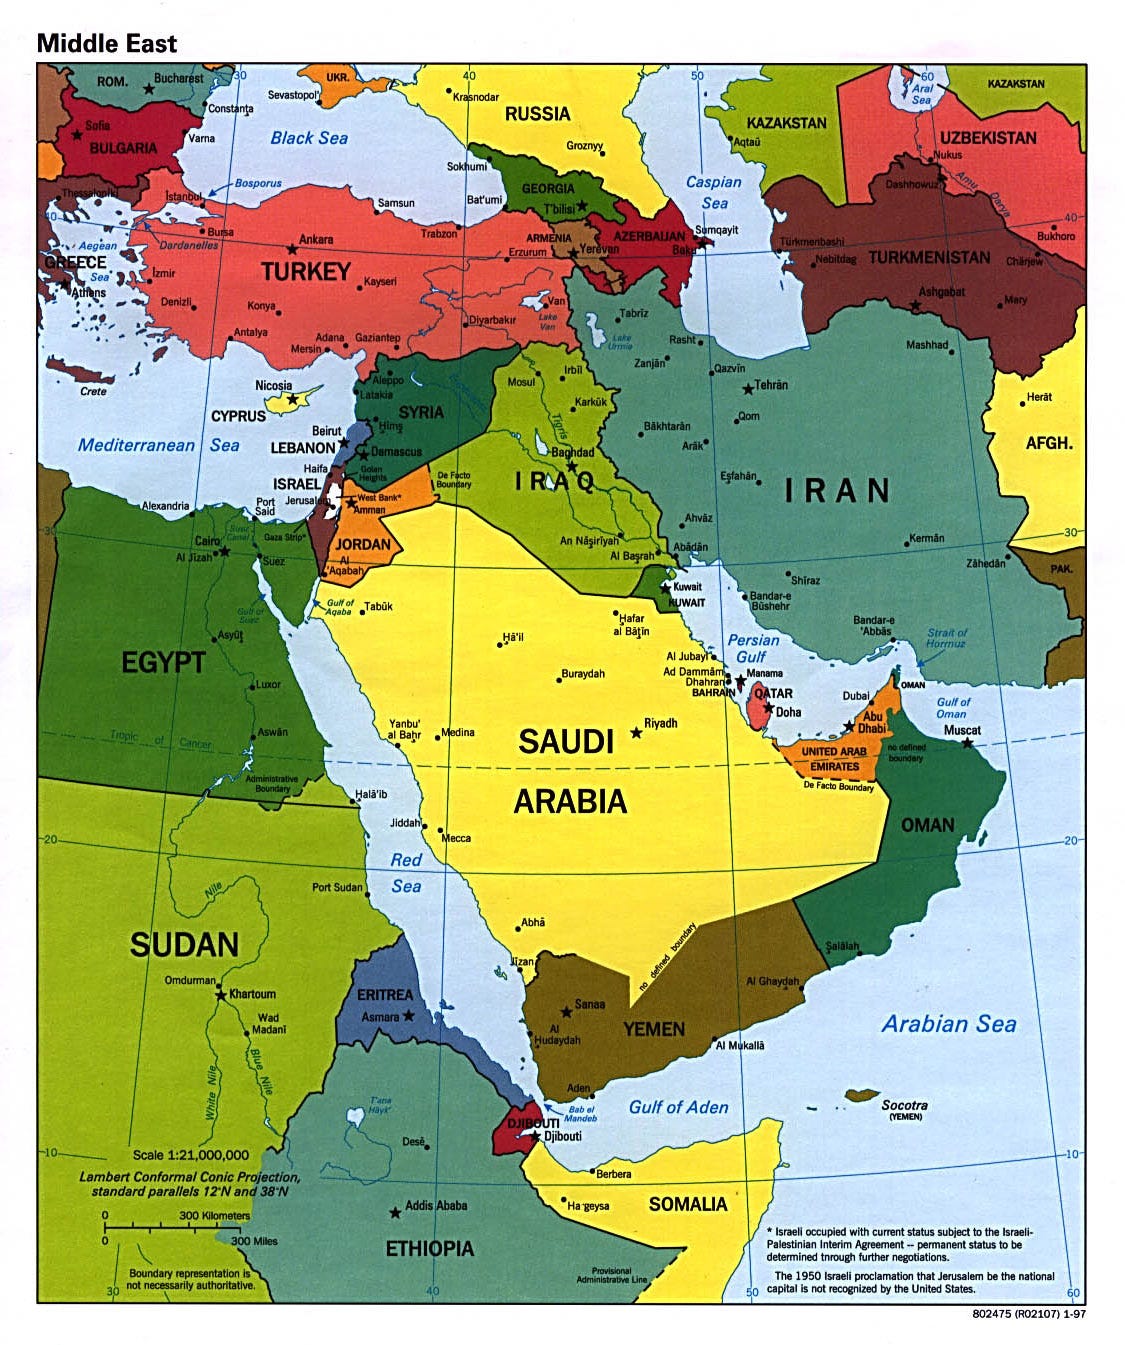 https://www.mapsland.com/maps/asia/middle-east/large-political-map-of-the-middle-east-with-major-cities-and-capitals-1997.jpg